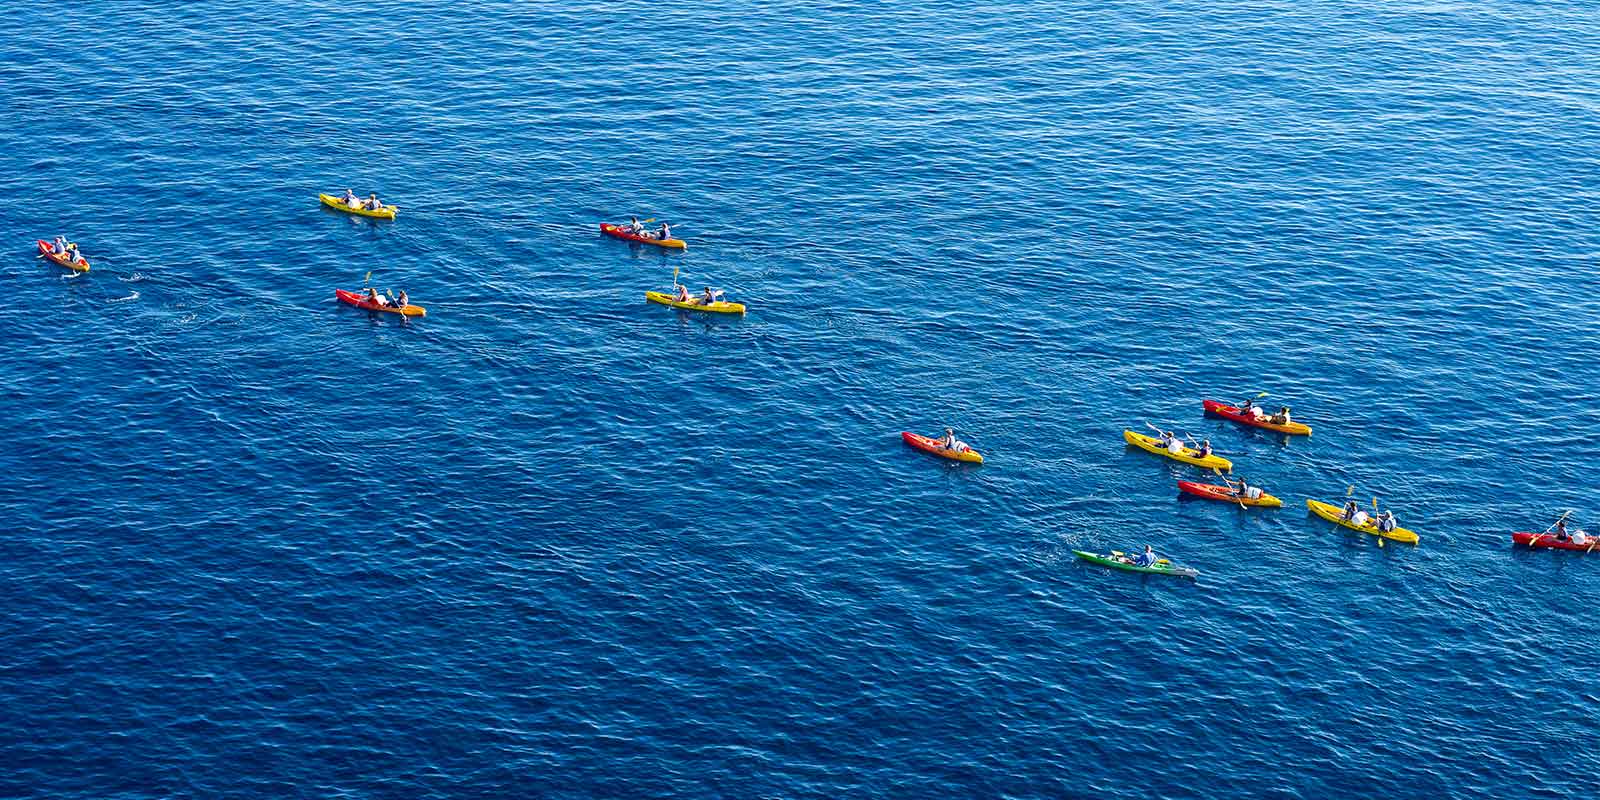 Group of kayakers in the Adriatic sea around the coast of Dubrovnik